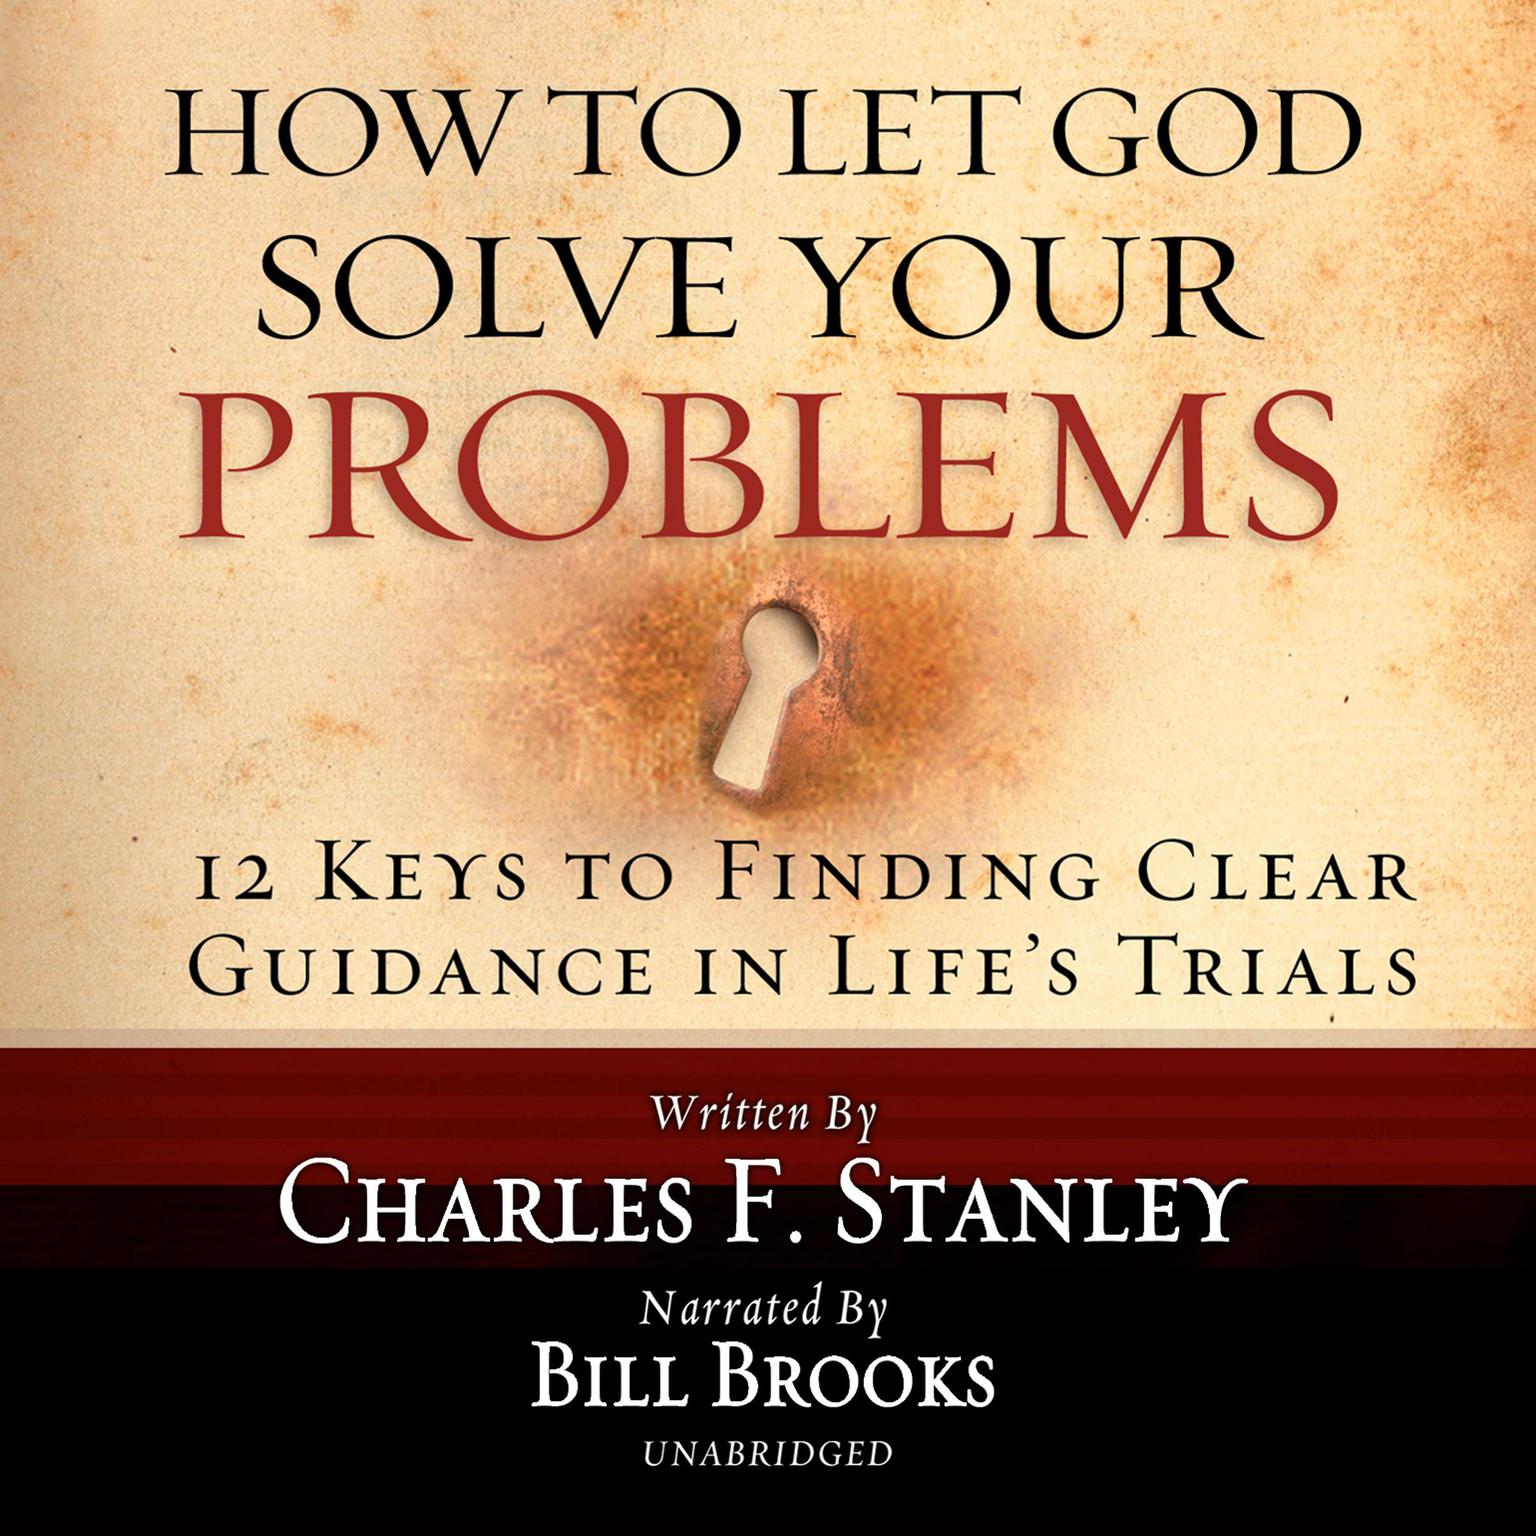 How to Let God Solve Your Problems: 12 Keys for Finding Clear Guidance in Lifes Trials Audiobook, by Charles F. Stanley